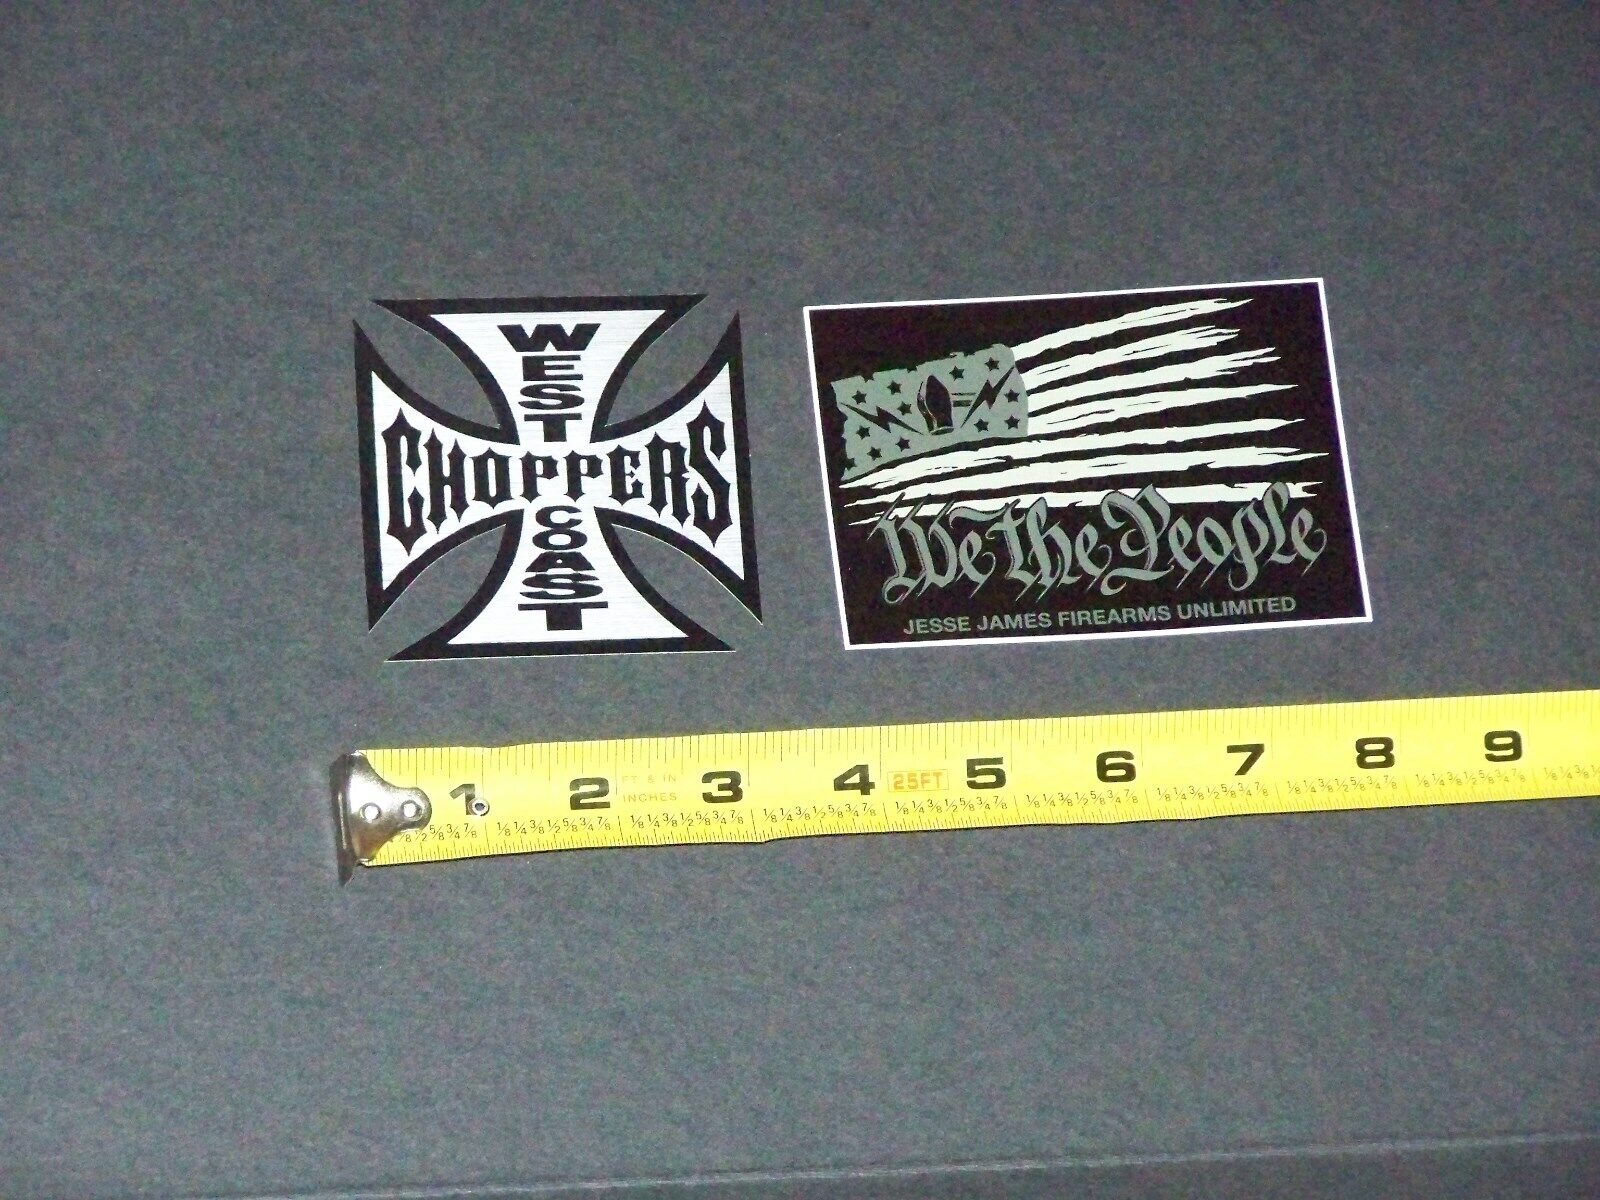 WEST COAST CHOPPERS & JESSE JAMES We the People FIREARMS Decal Stickers Lot Set